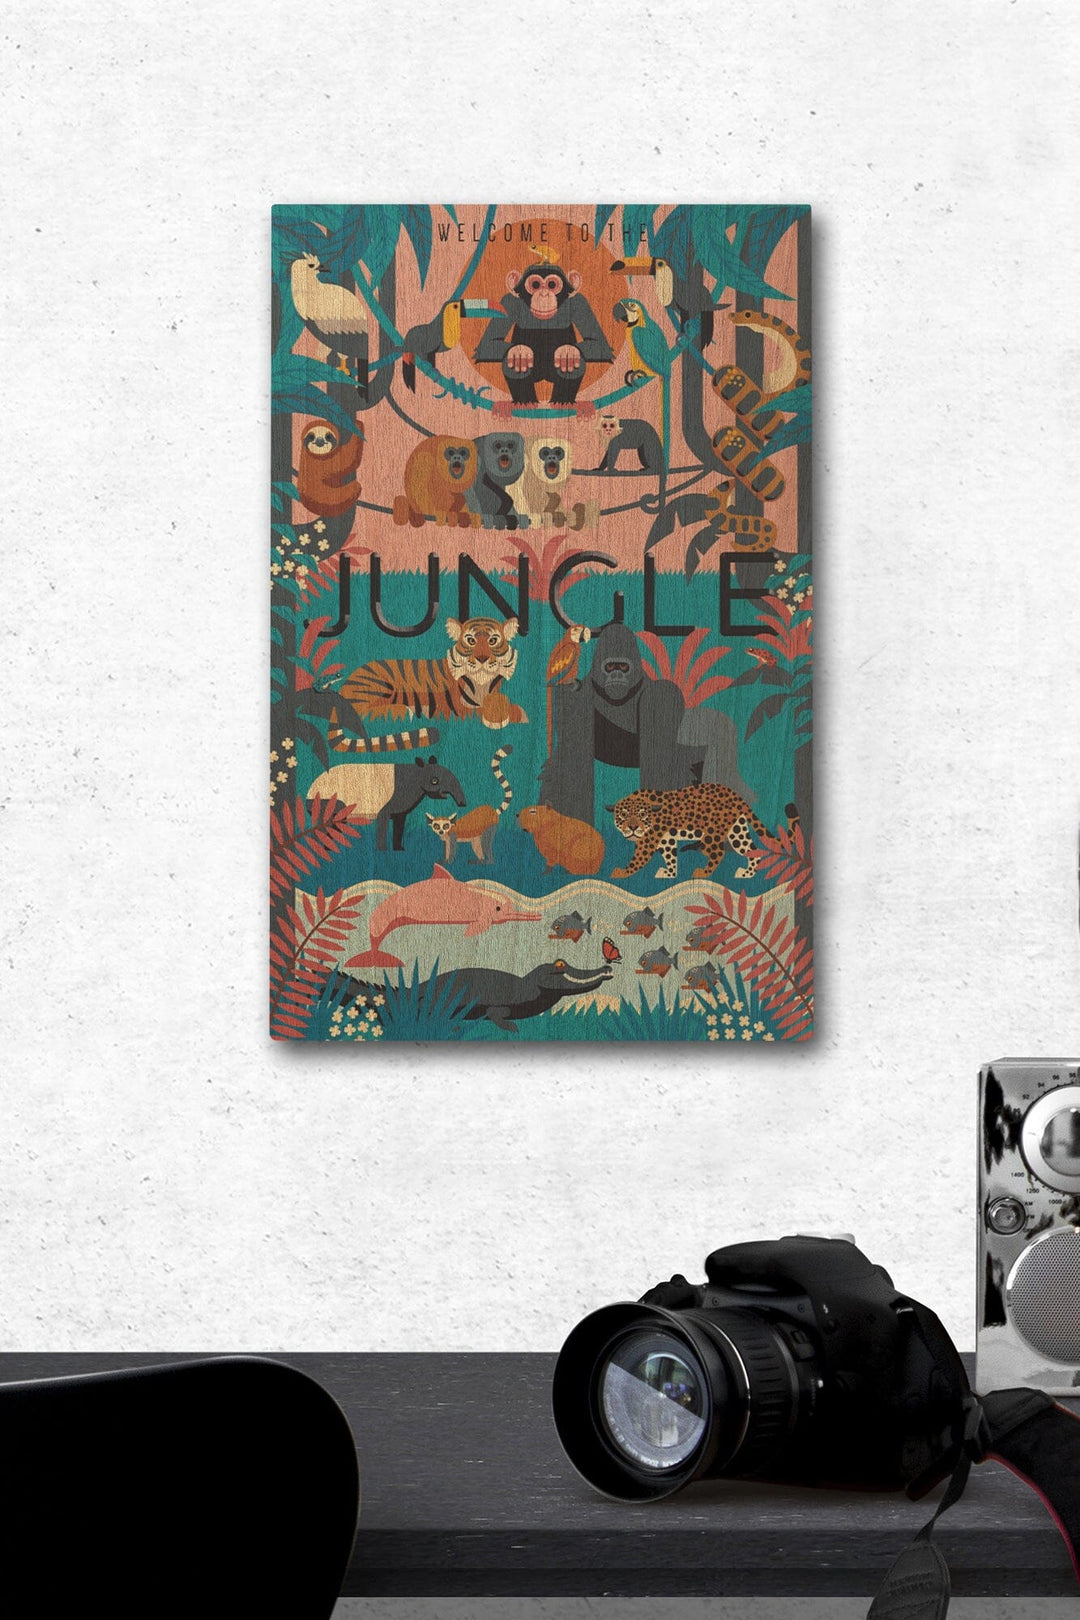 Welcome to the Jungle, Jungle, Textured Geometric, Lantern Press Artwork, Wood Signs and Postcards Wood Lantern Press 12 x 18 Wood Gallery Print 